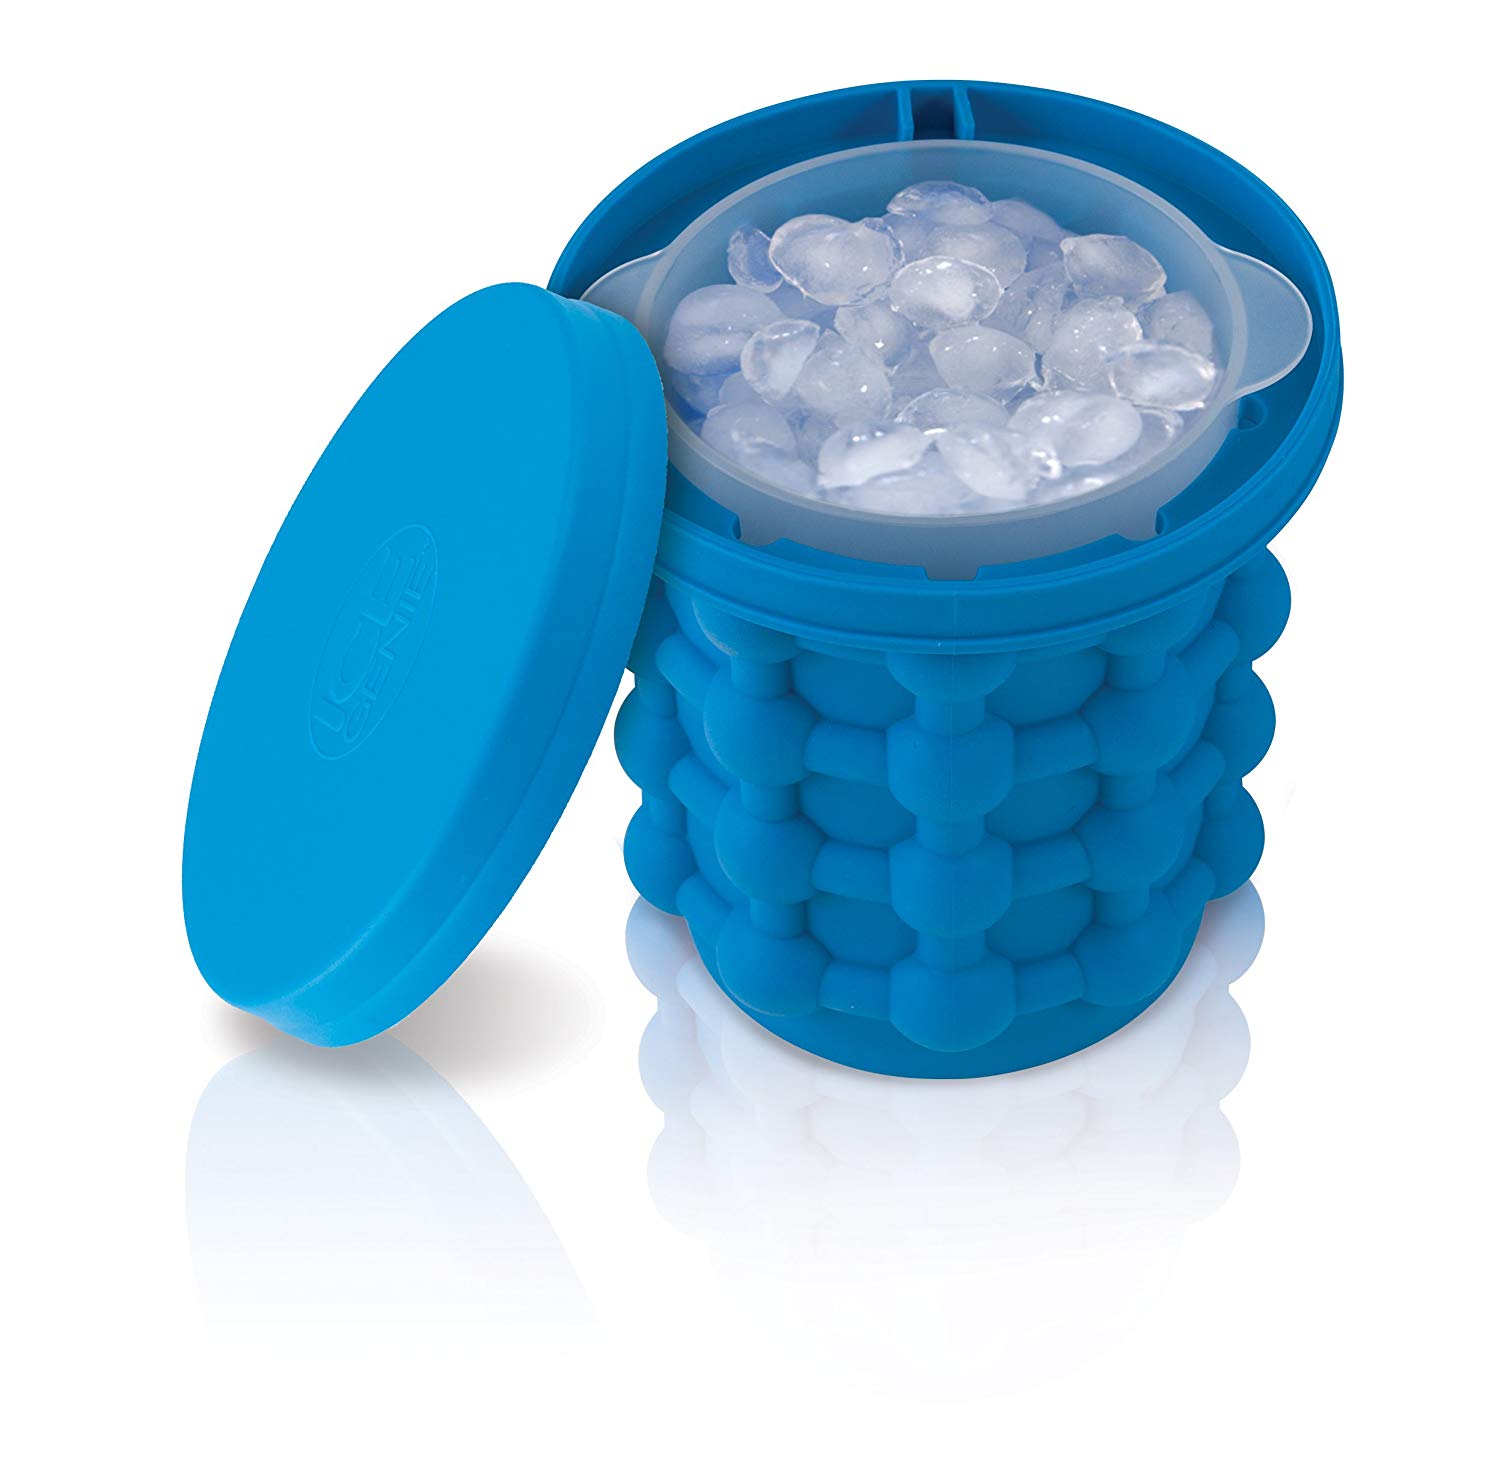 The Ultimate Ice Cube Maker Silicone Bucket With Lid Makes Small Size Nugget Ice Chips For